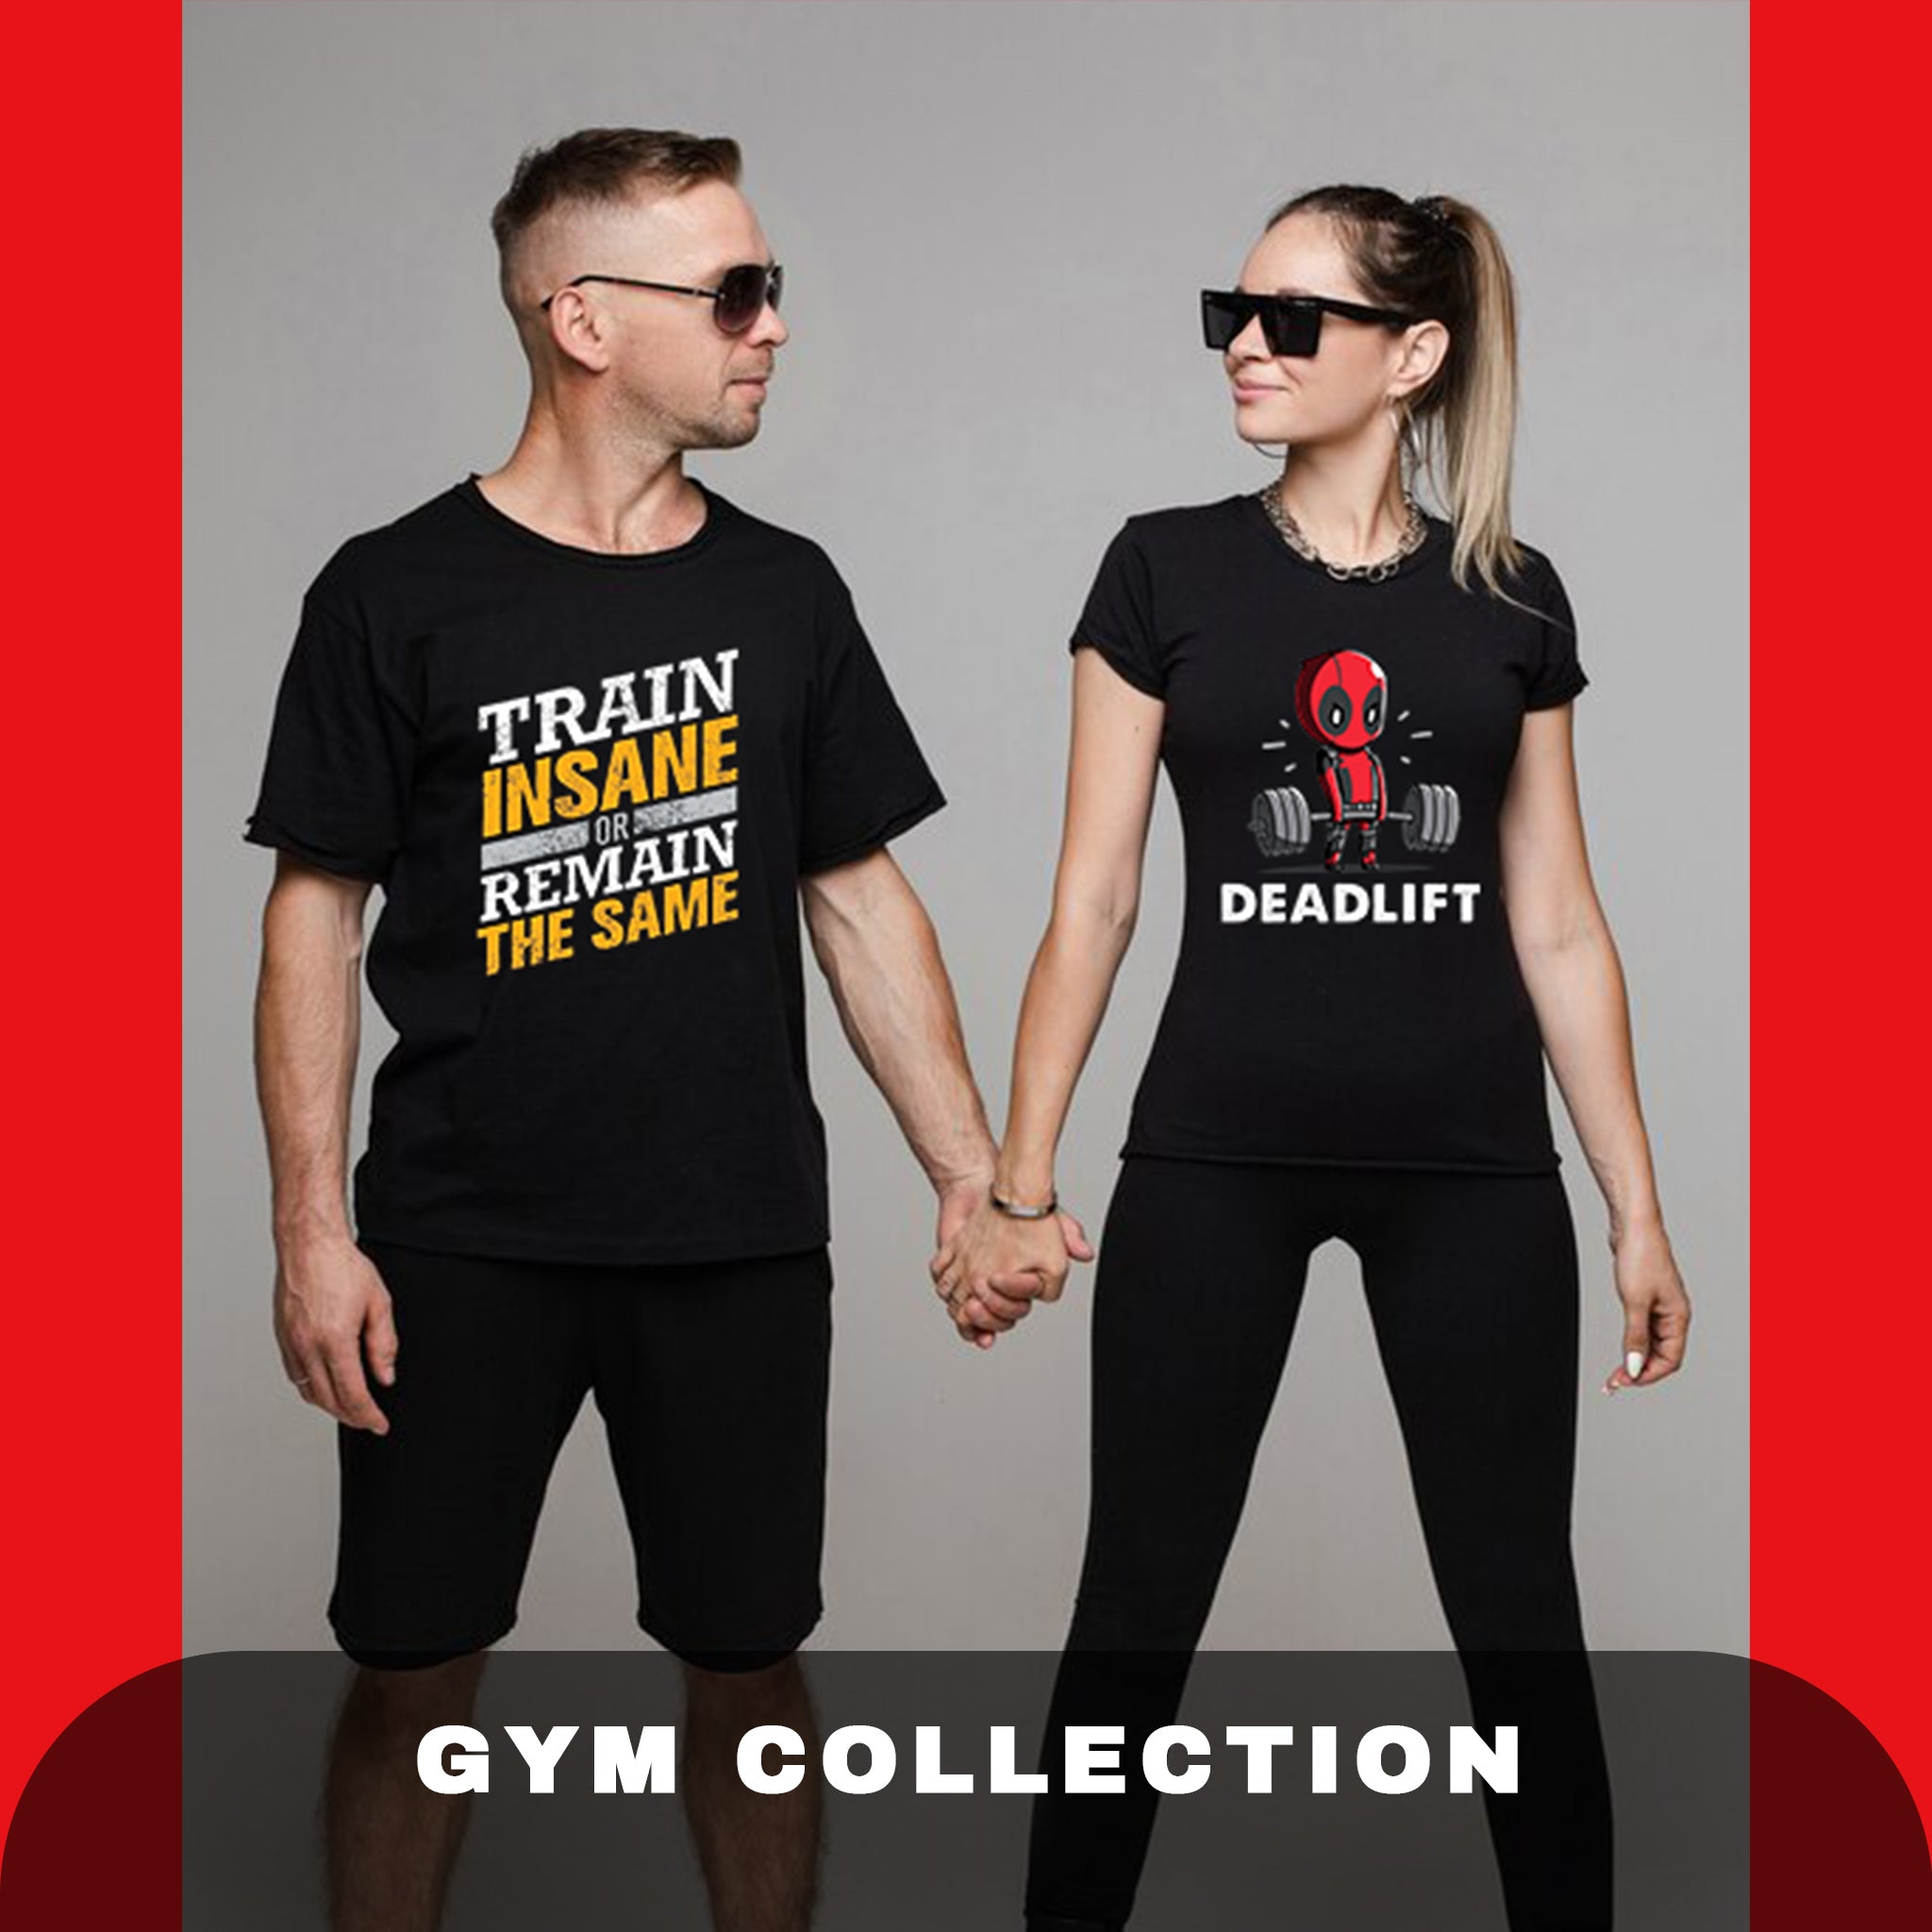 Gym T-Shirts Collection Image